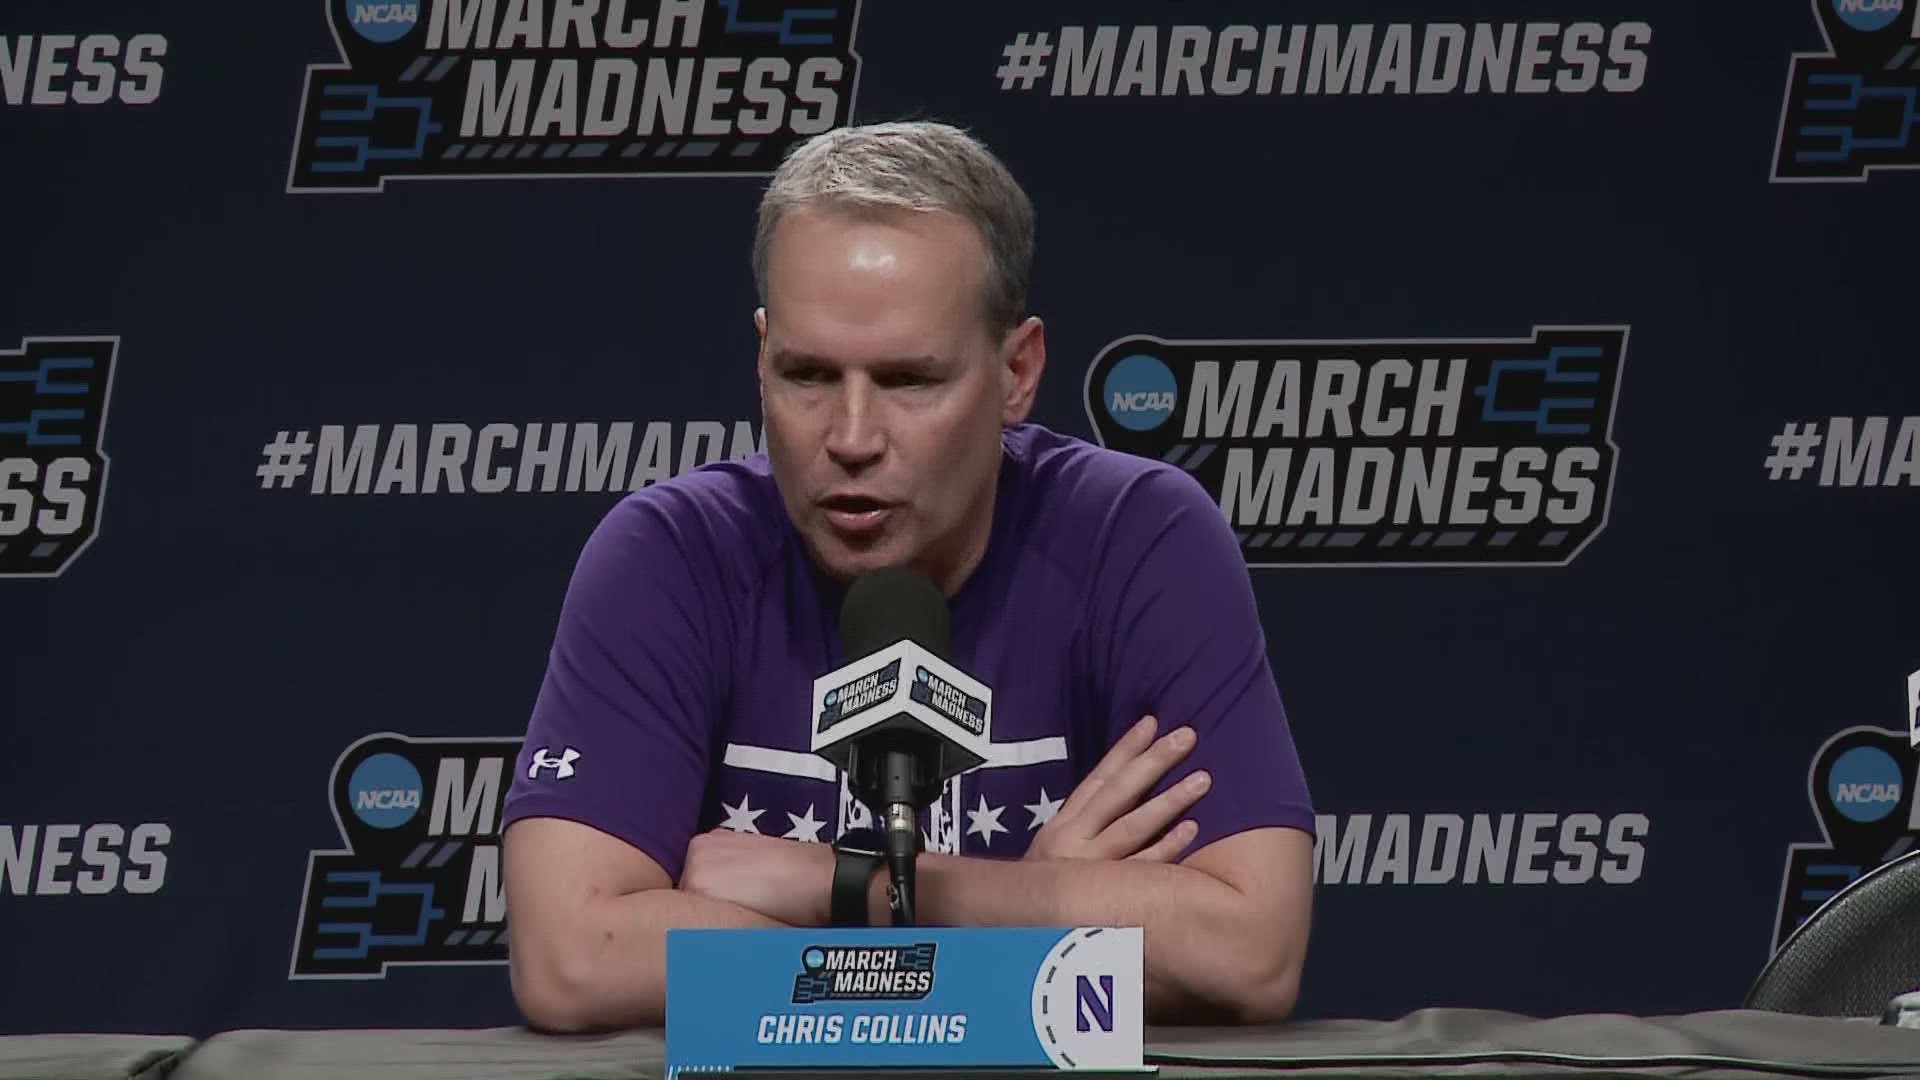 Northwestern head coach Chris Collins and Wildcat players take the podium in Sacramento ahead of Thursday's NCAA Tournament matchup with Boise State.